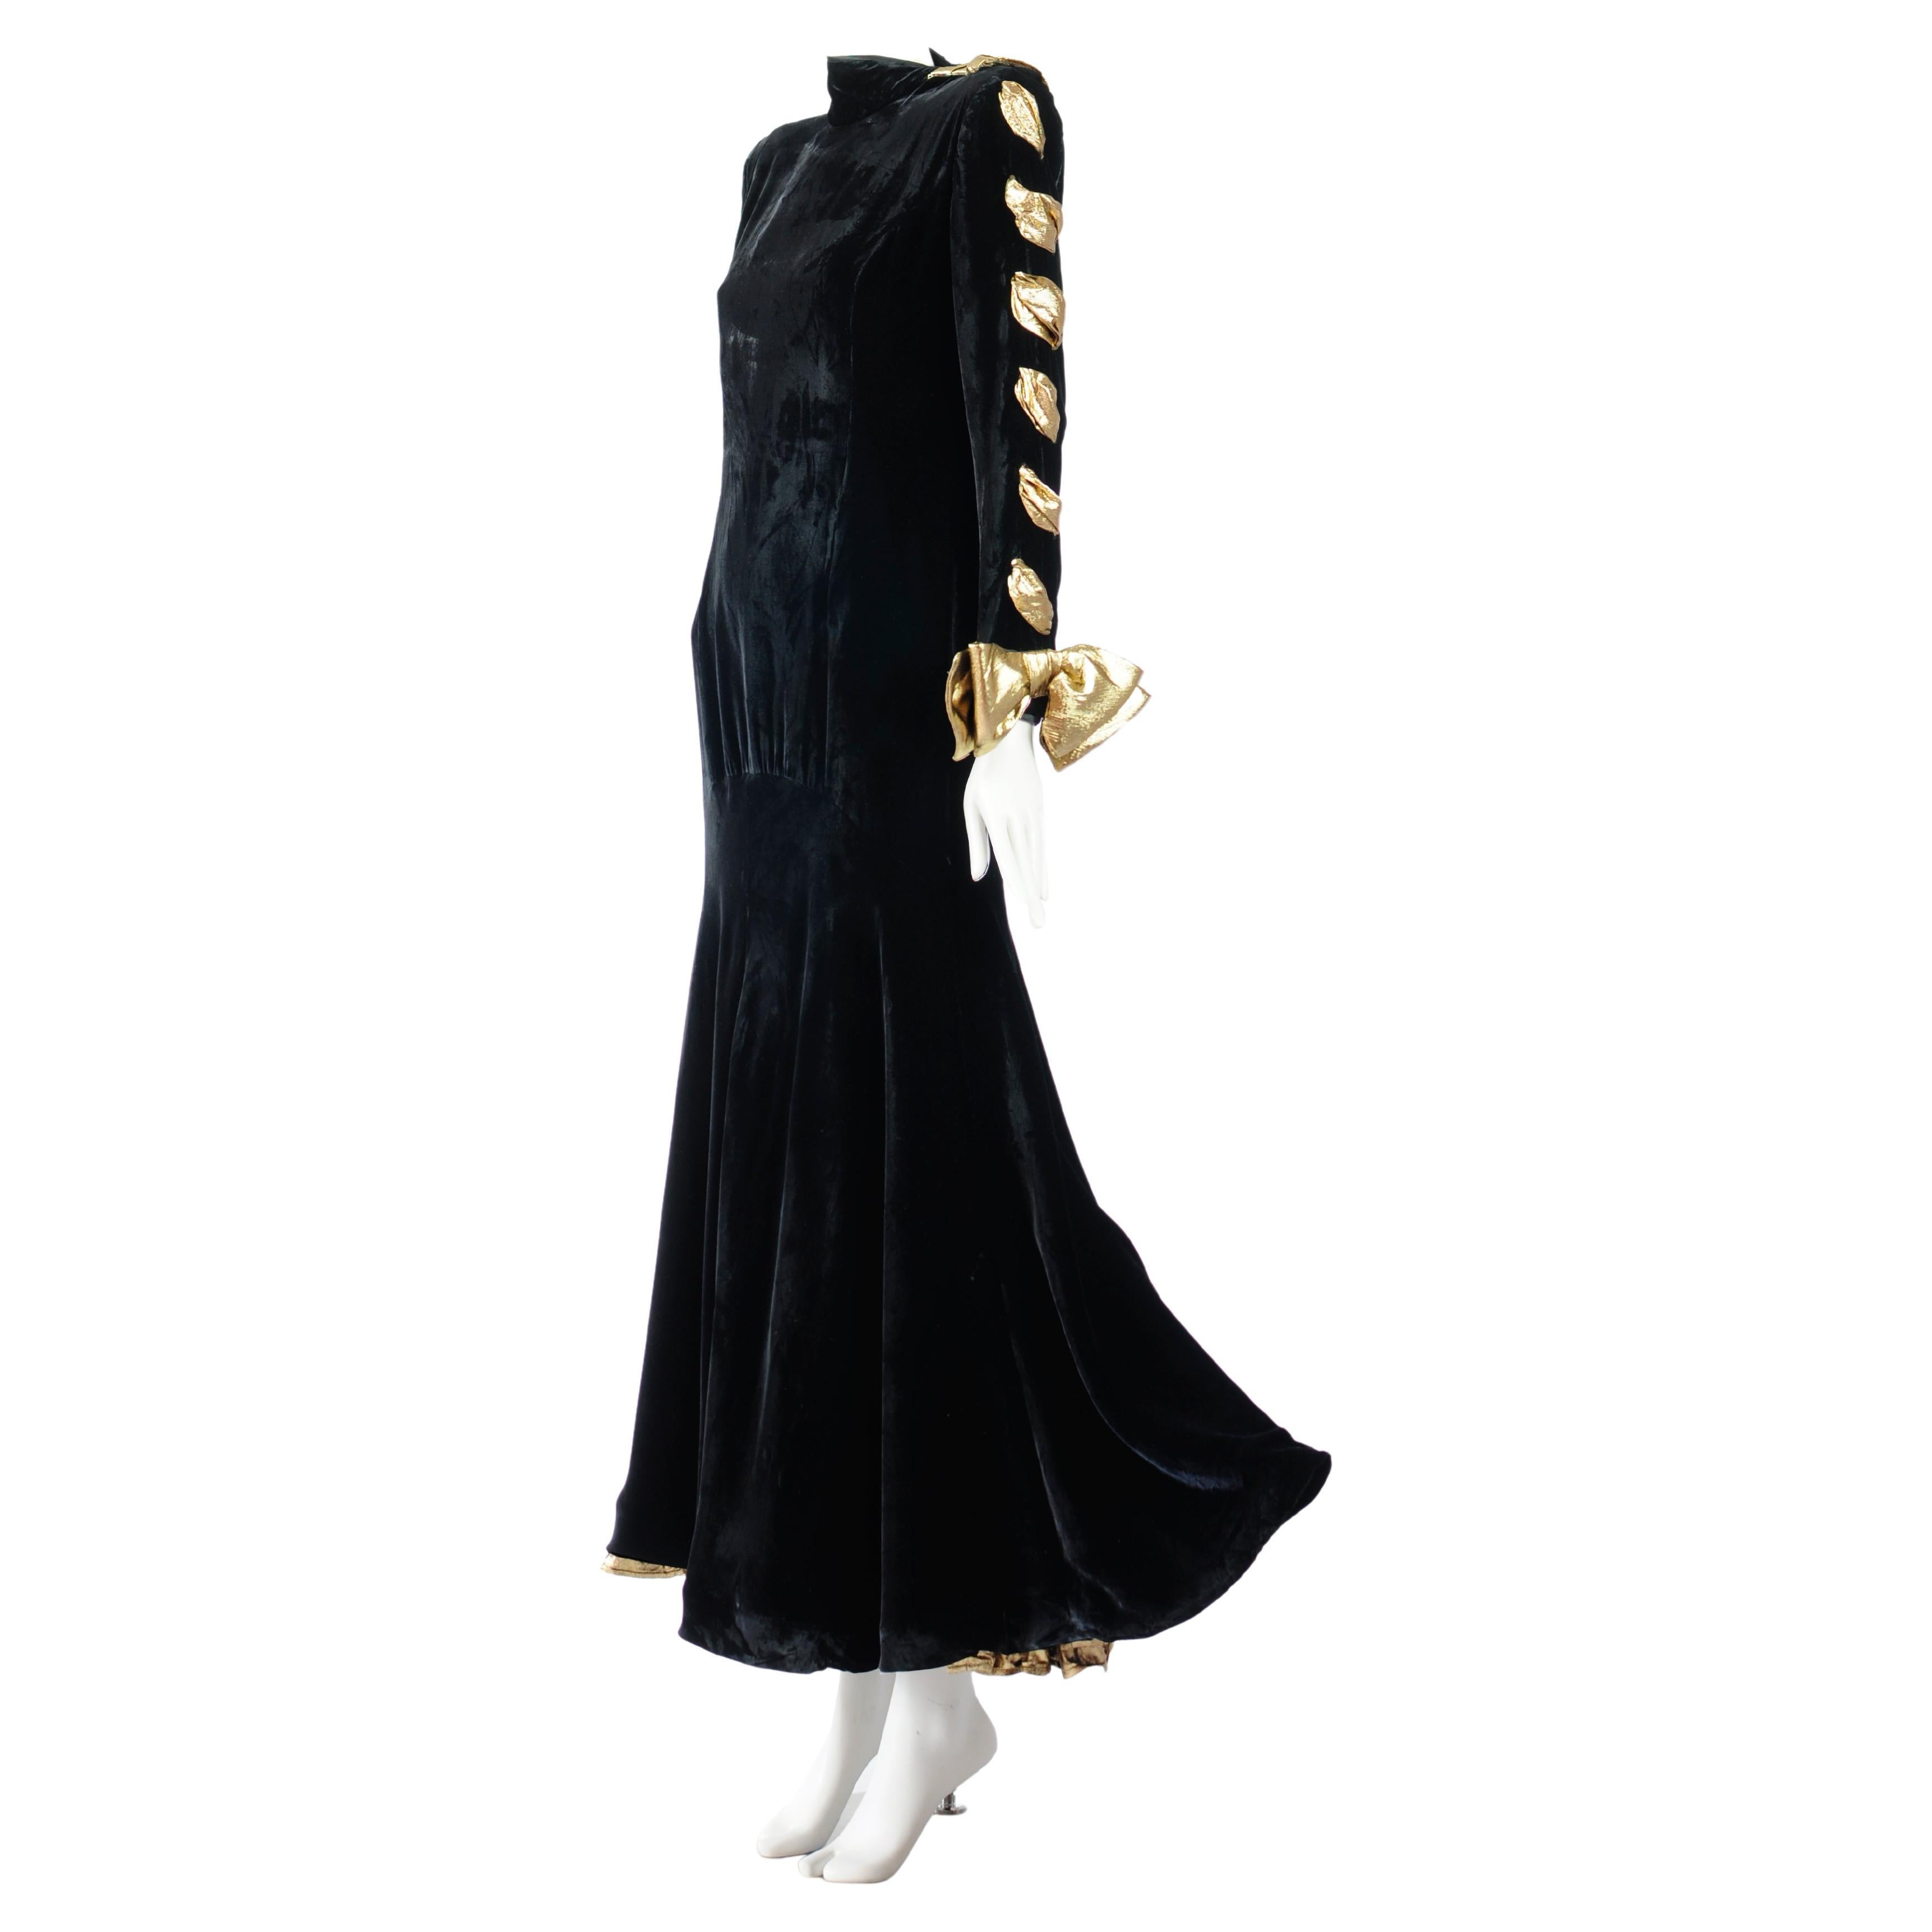 Valentino Boutique Black Velvet Long Sleeve Gown with Gold Lamé Bow Sleeve 1980s